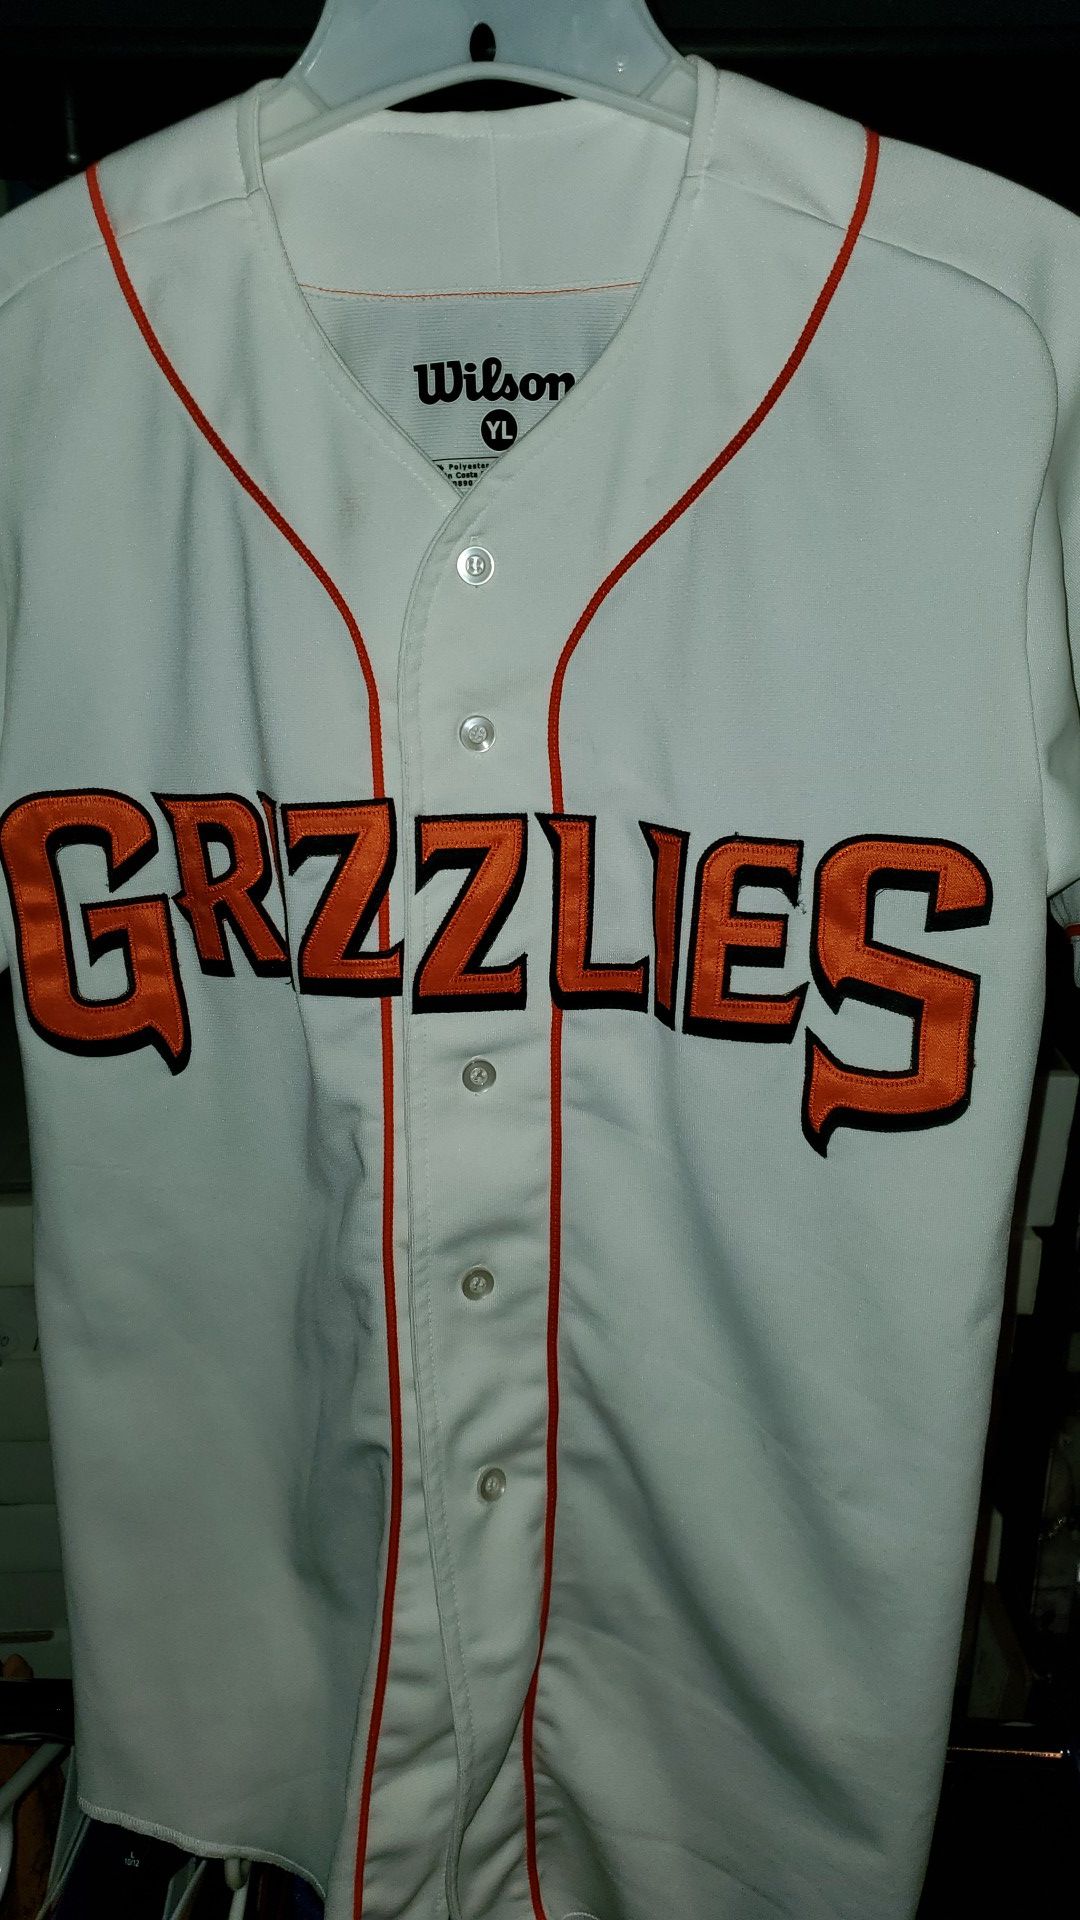 Official FRESNO GRIZZLIES WILSON baseball jersey size large youth for $25